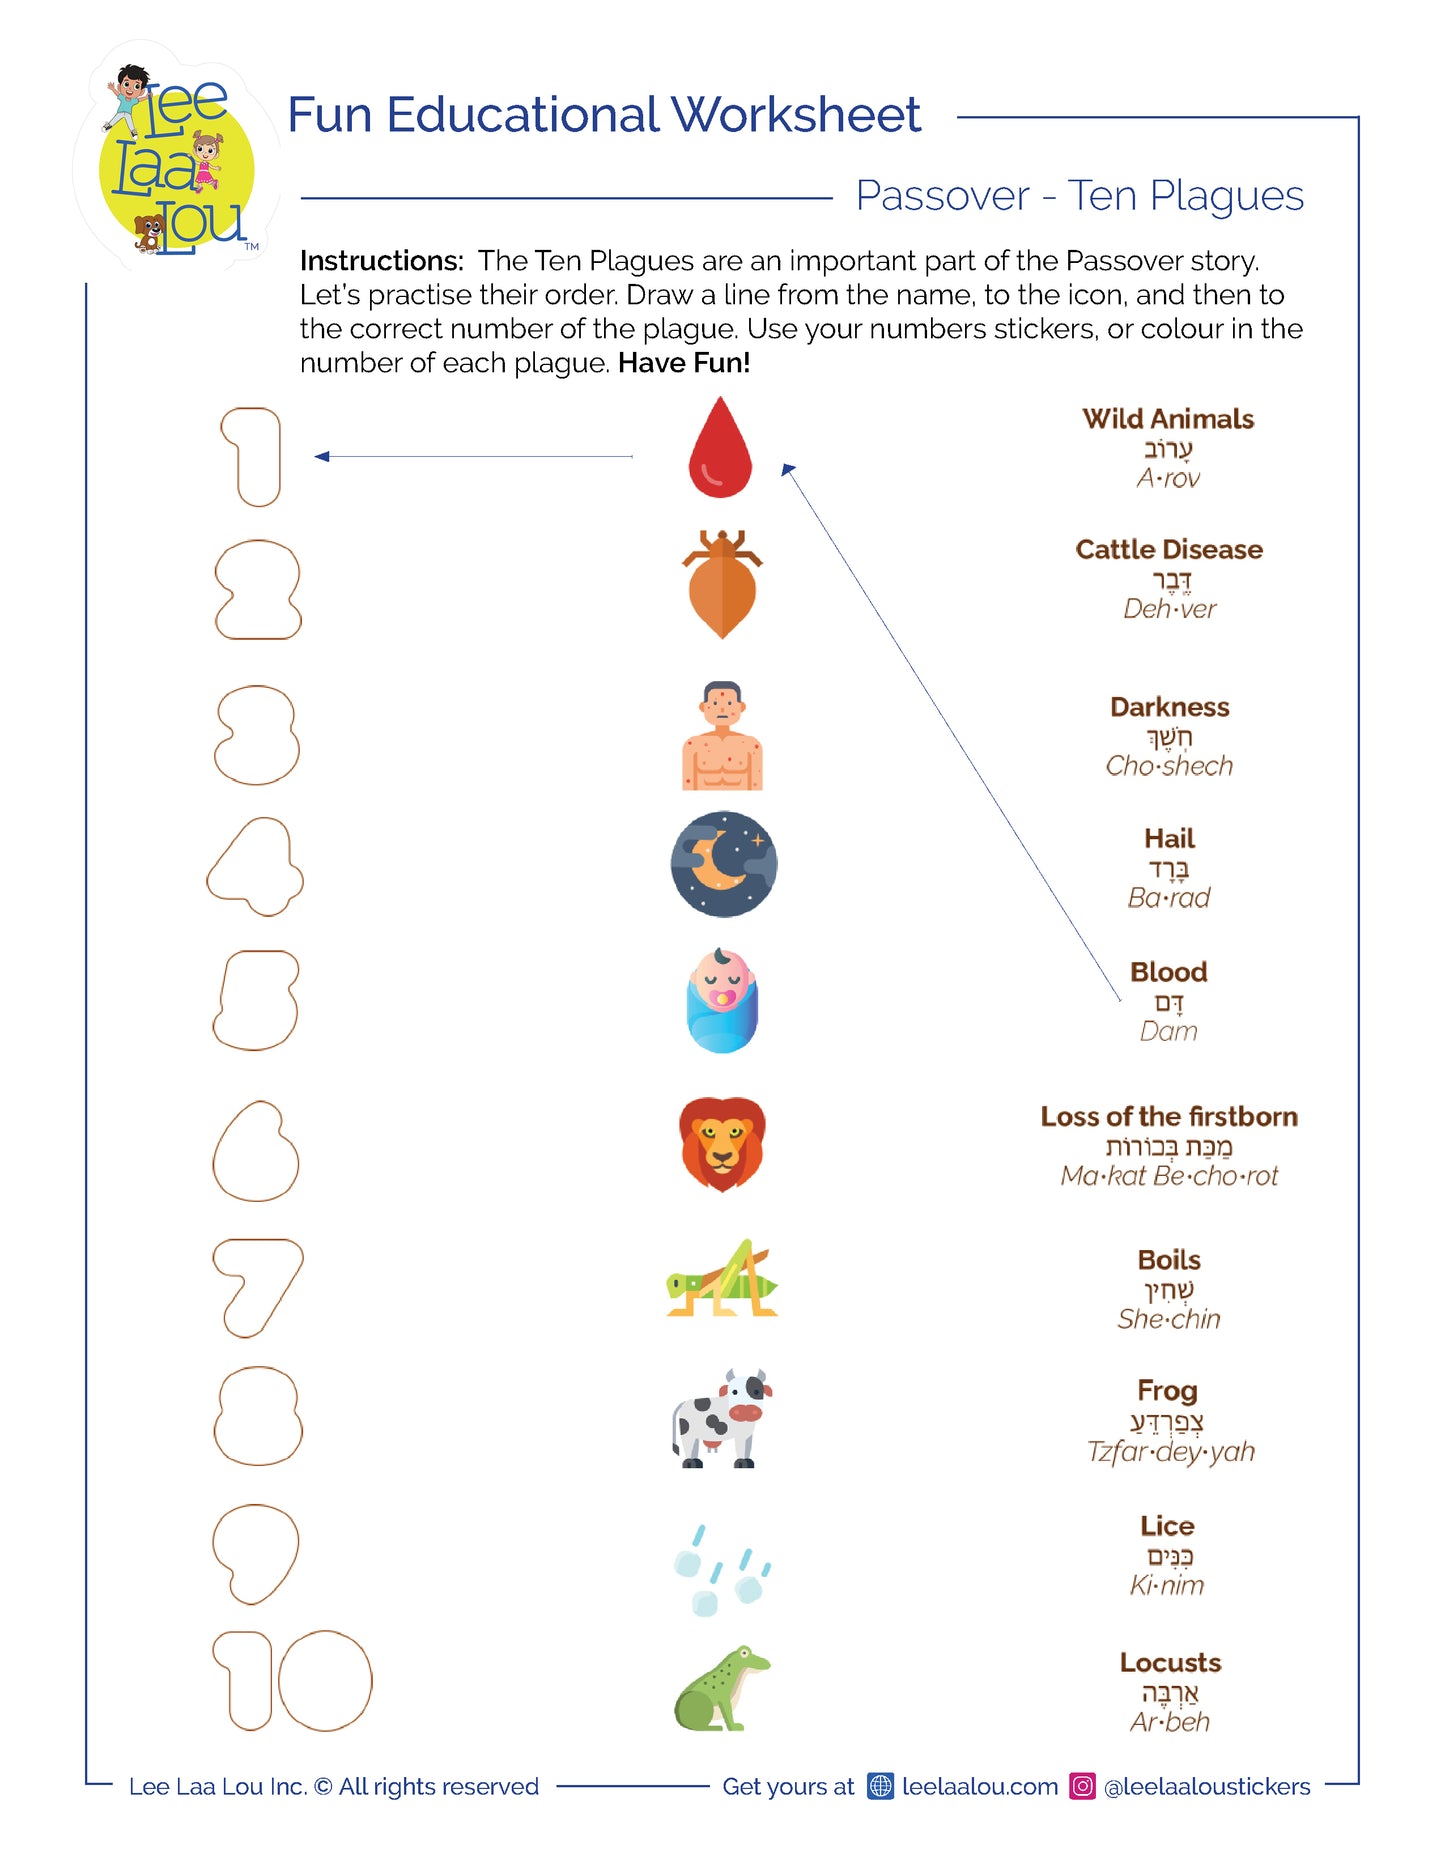 The Ten Plagues are an important part of the Passover story. Let’s practise their order. Draw a line from the name, to the icon, and then to the correct number of the plague. Use your numbers stickers, or colour in the number of each plague. 